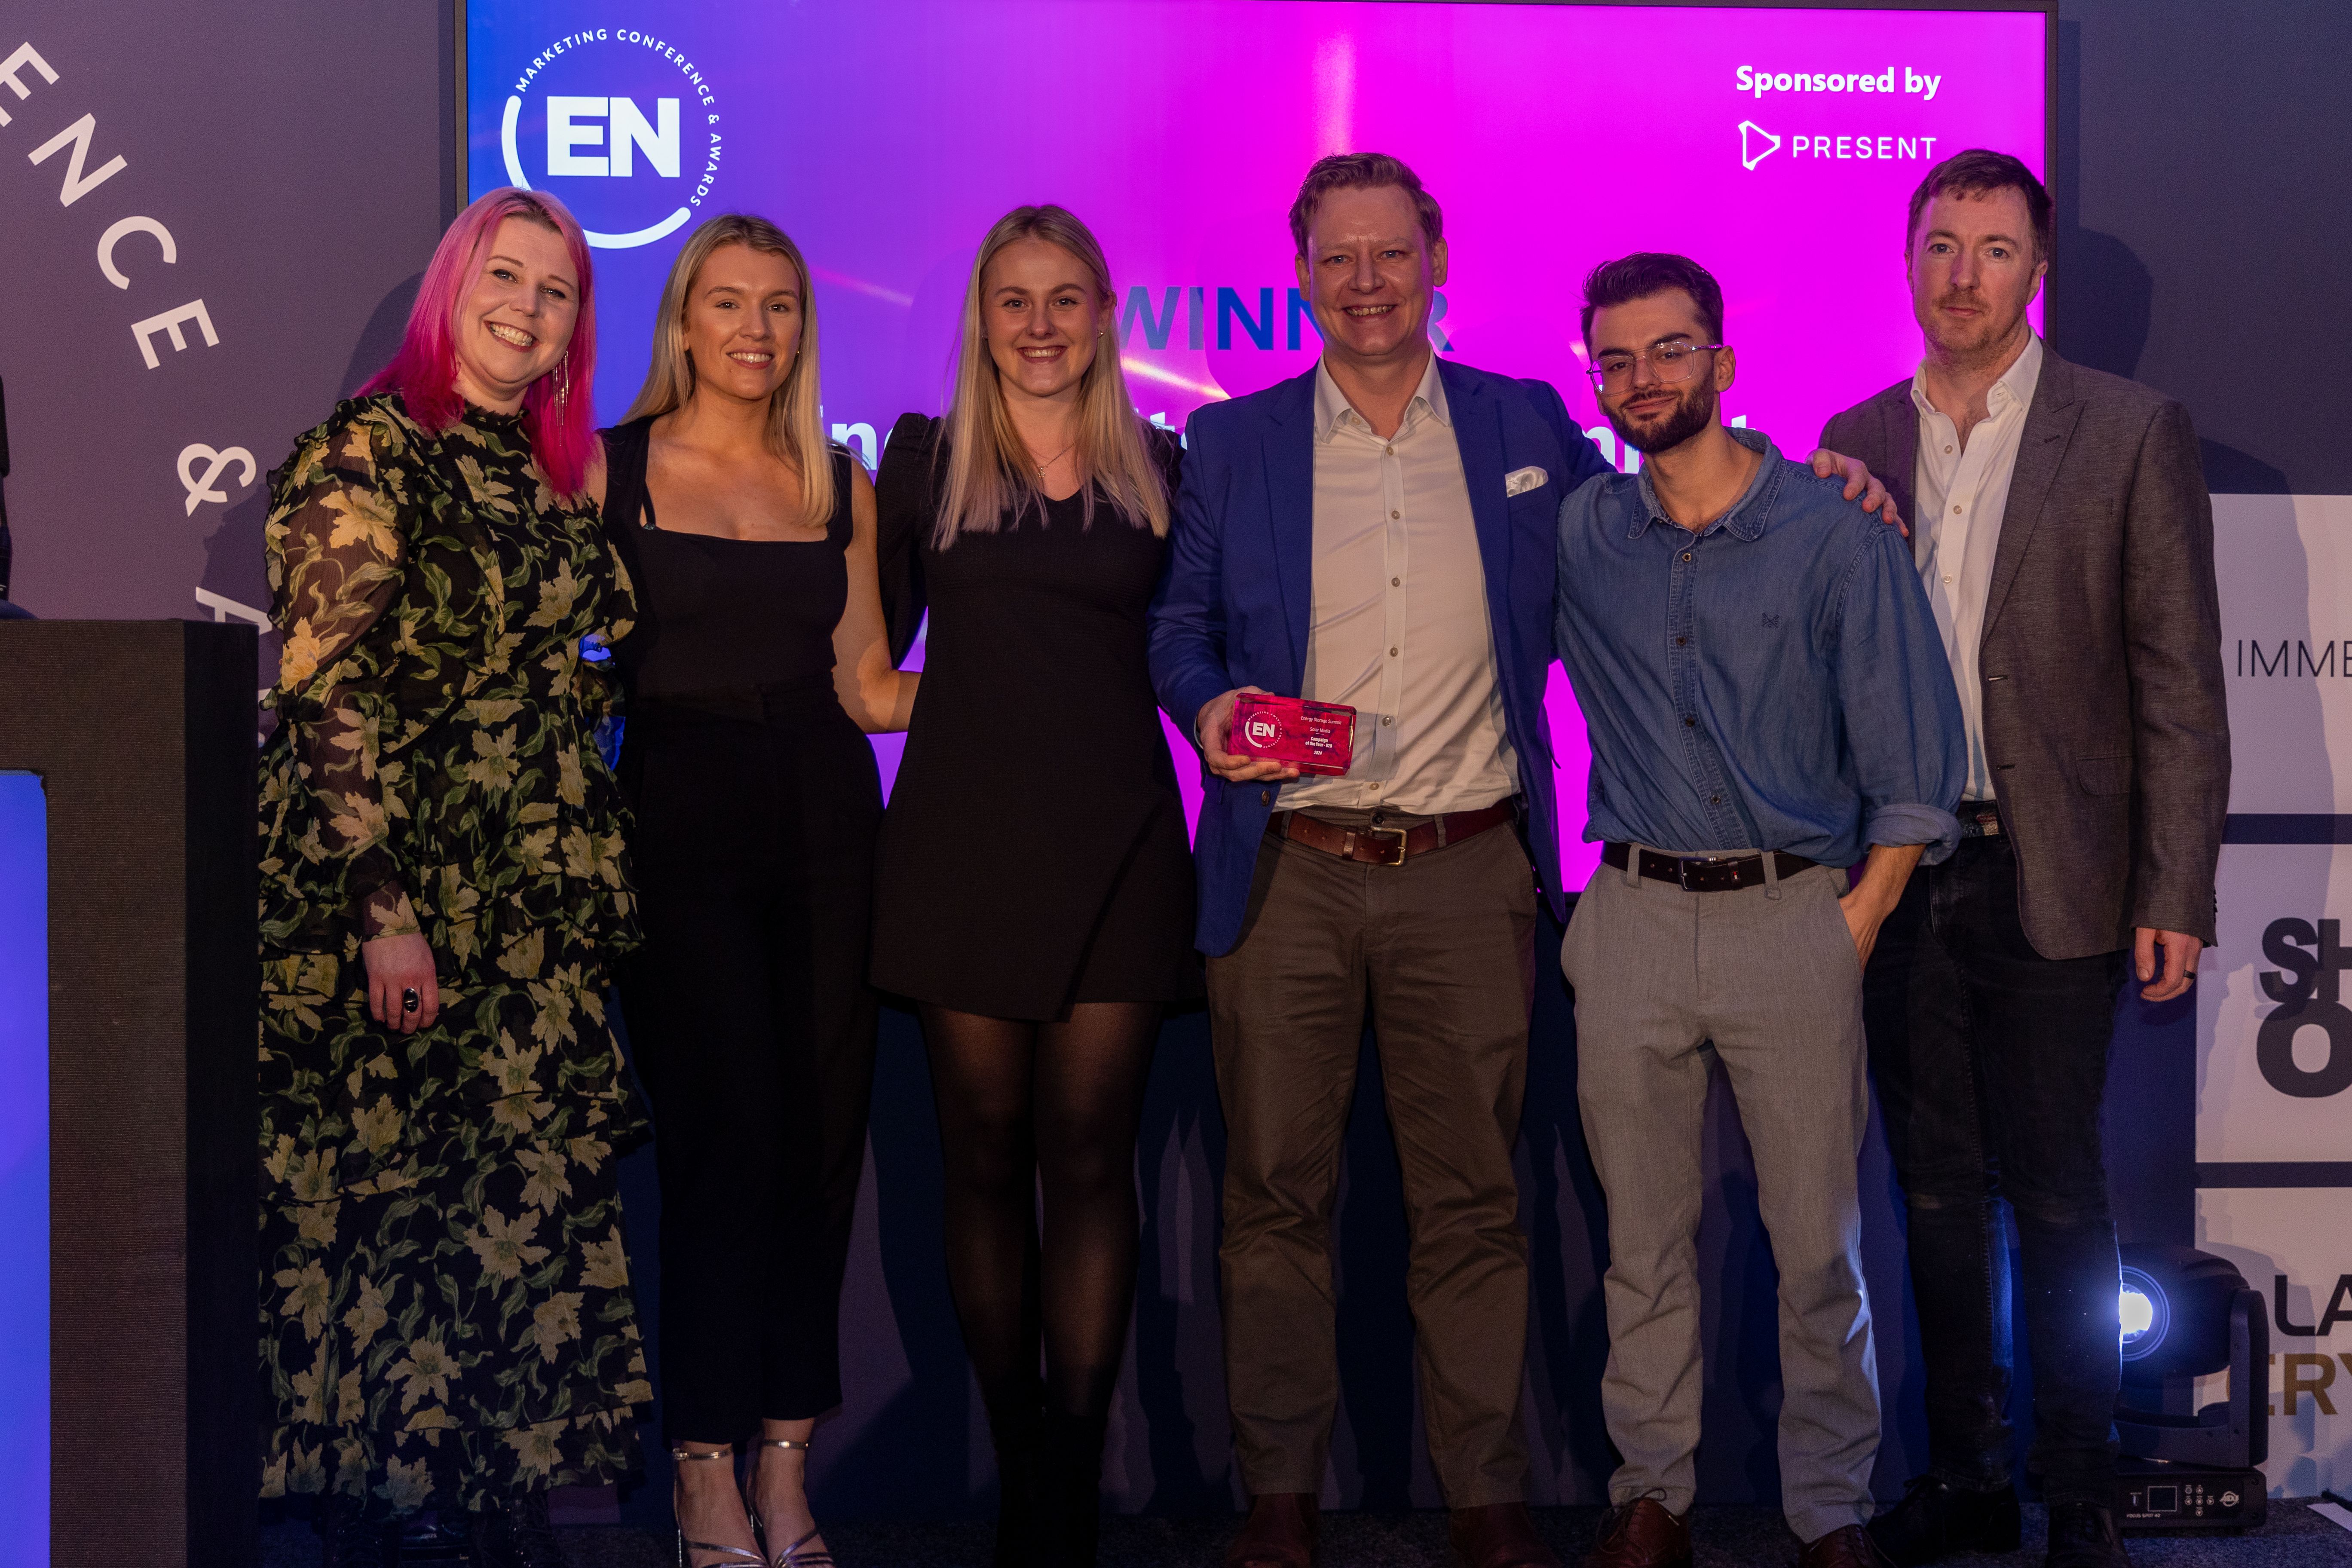 Campaign of the Year - B2B sponsored by Present Communications  